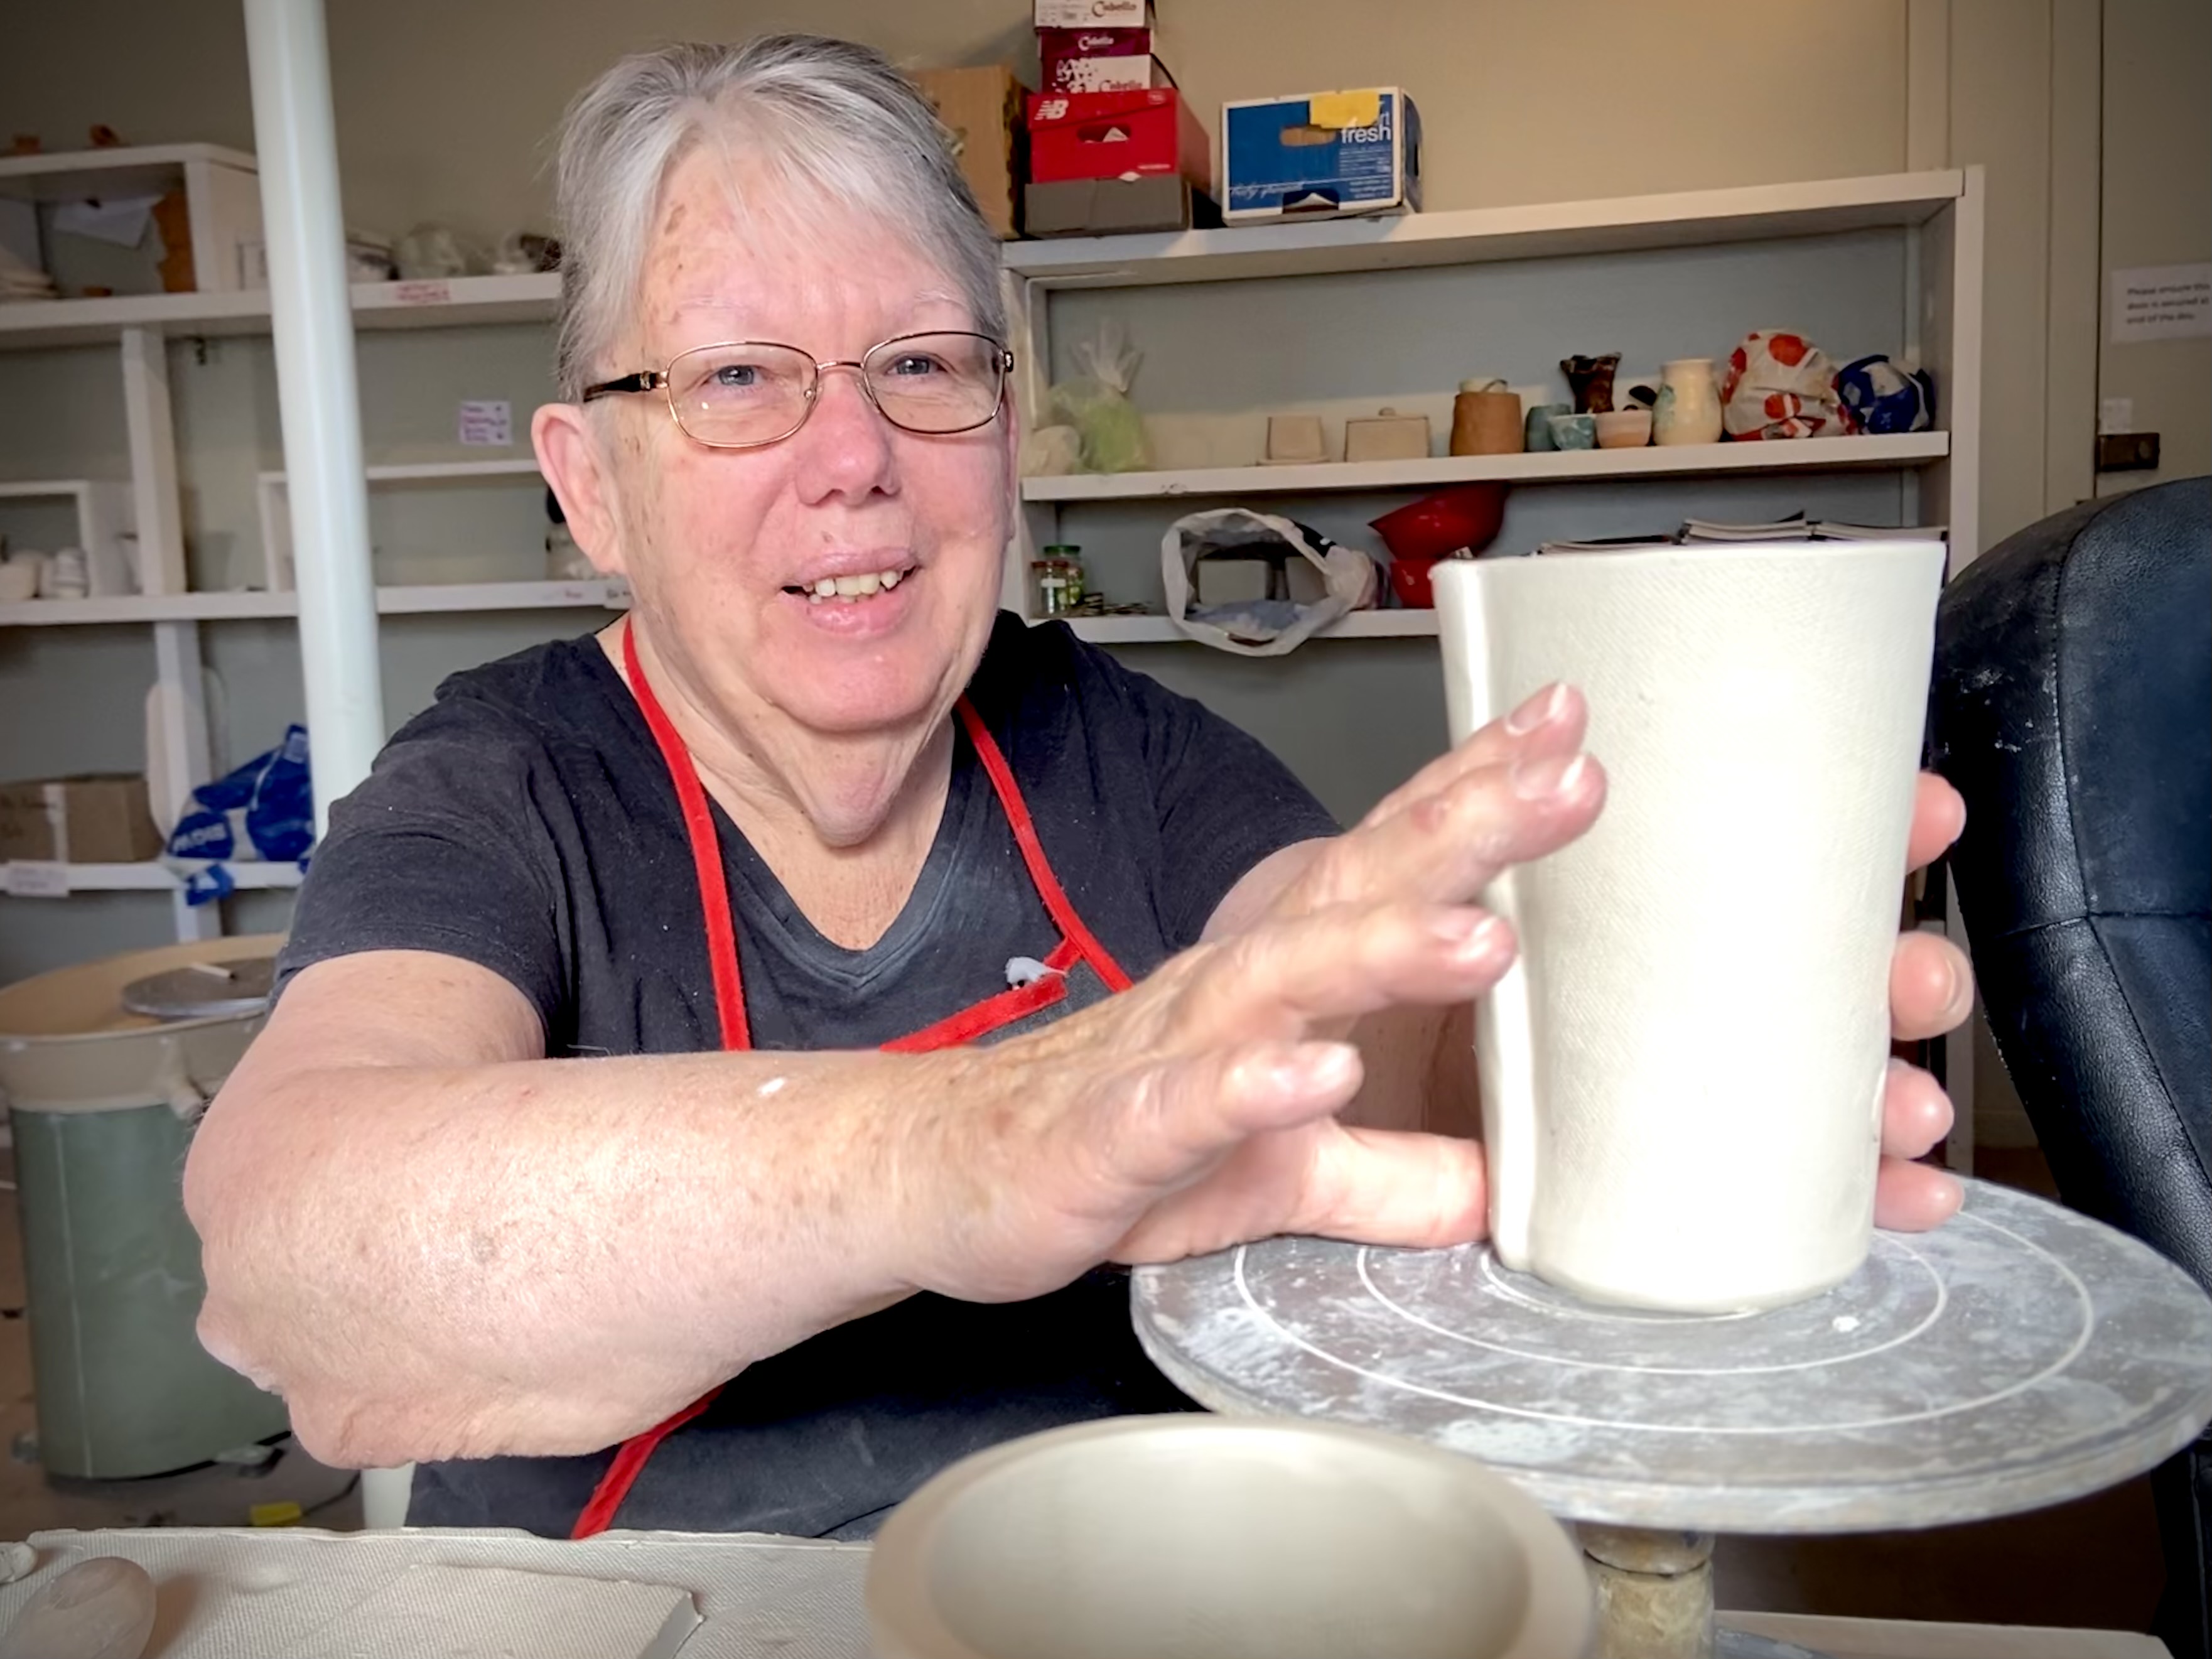 'Playing with mud' is back in vogue as potential potters embrace an ancient art form